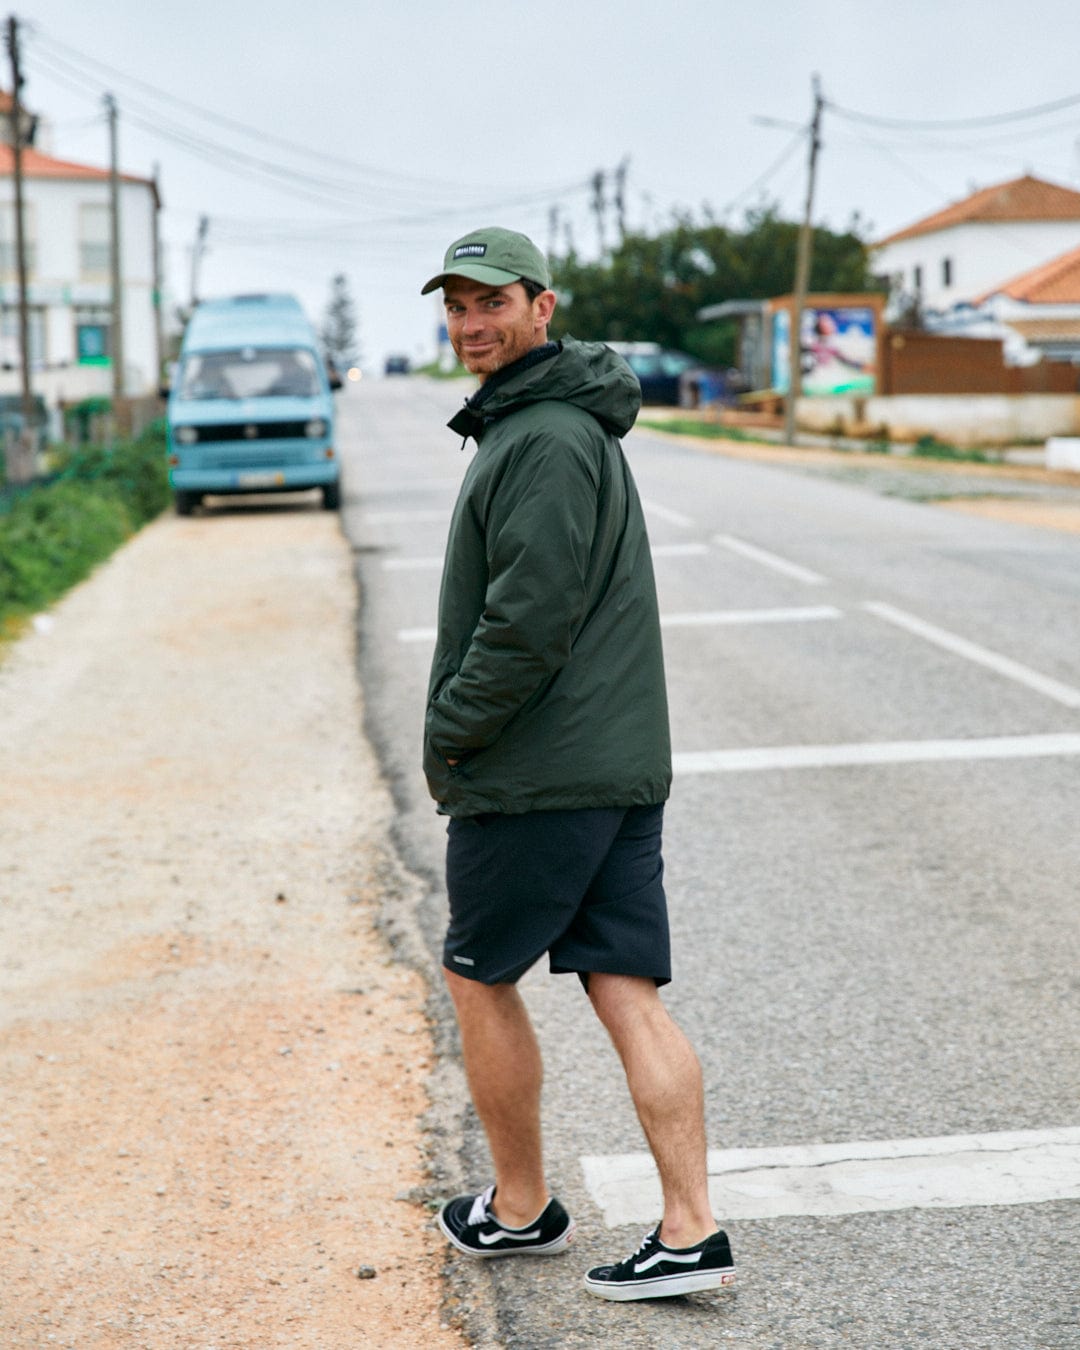 Man in a Saltrock Rainier - Mens Packable Waterproof Jacket in Green and black shorts smiling over his shoulder while standing on a suburban road.